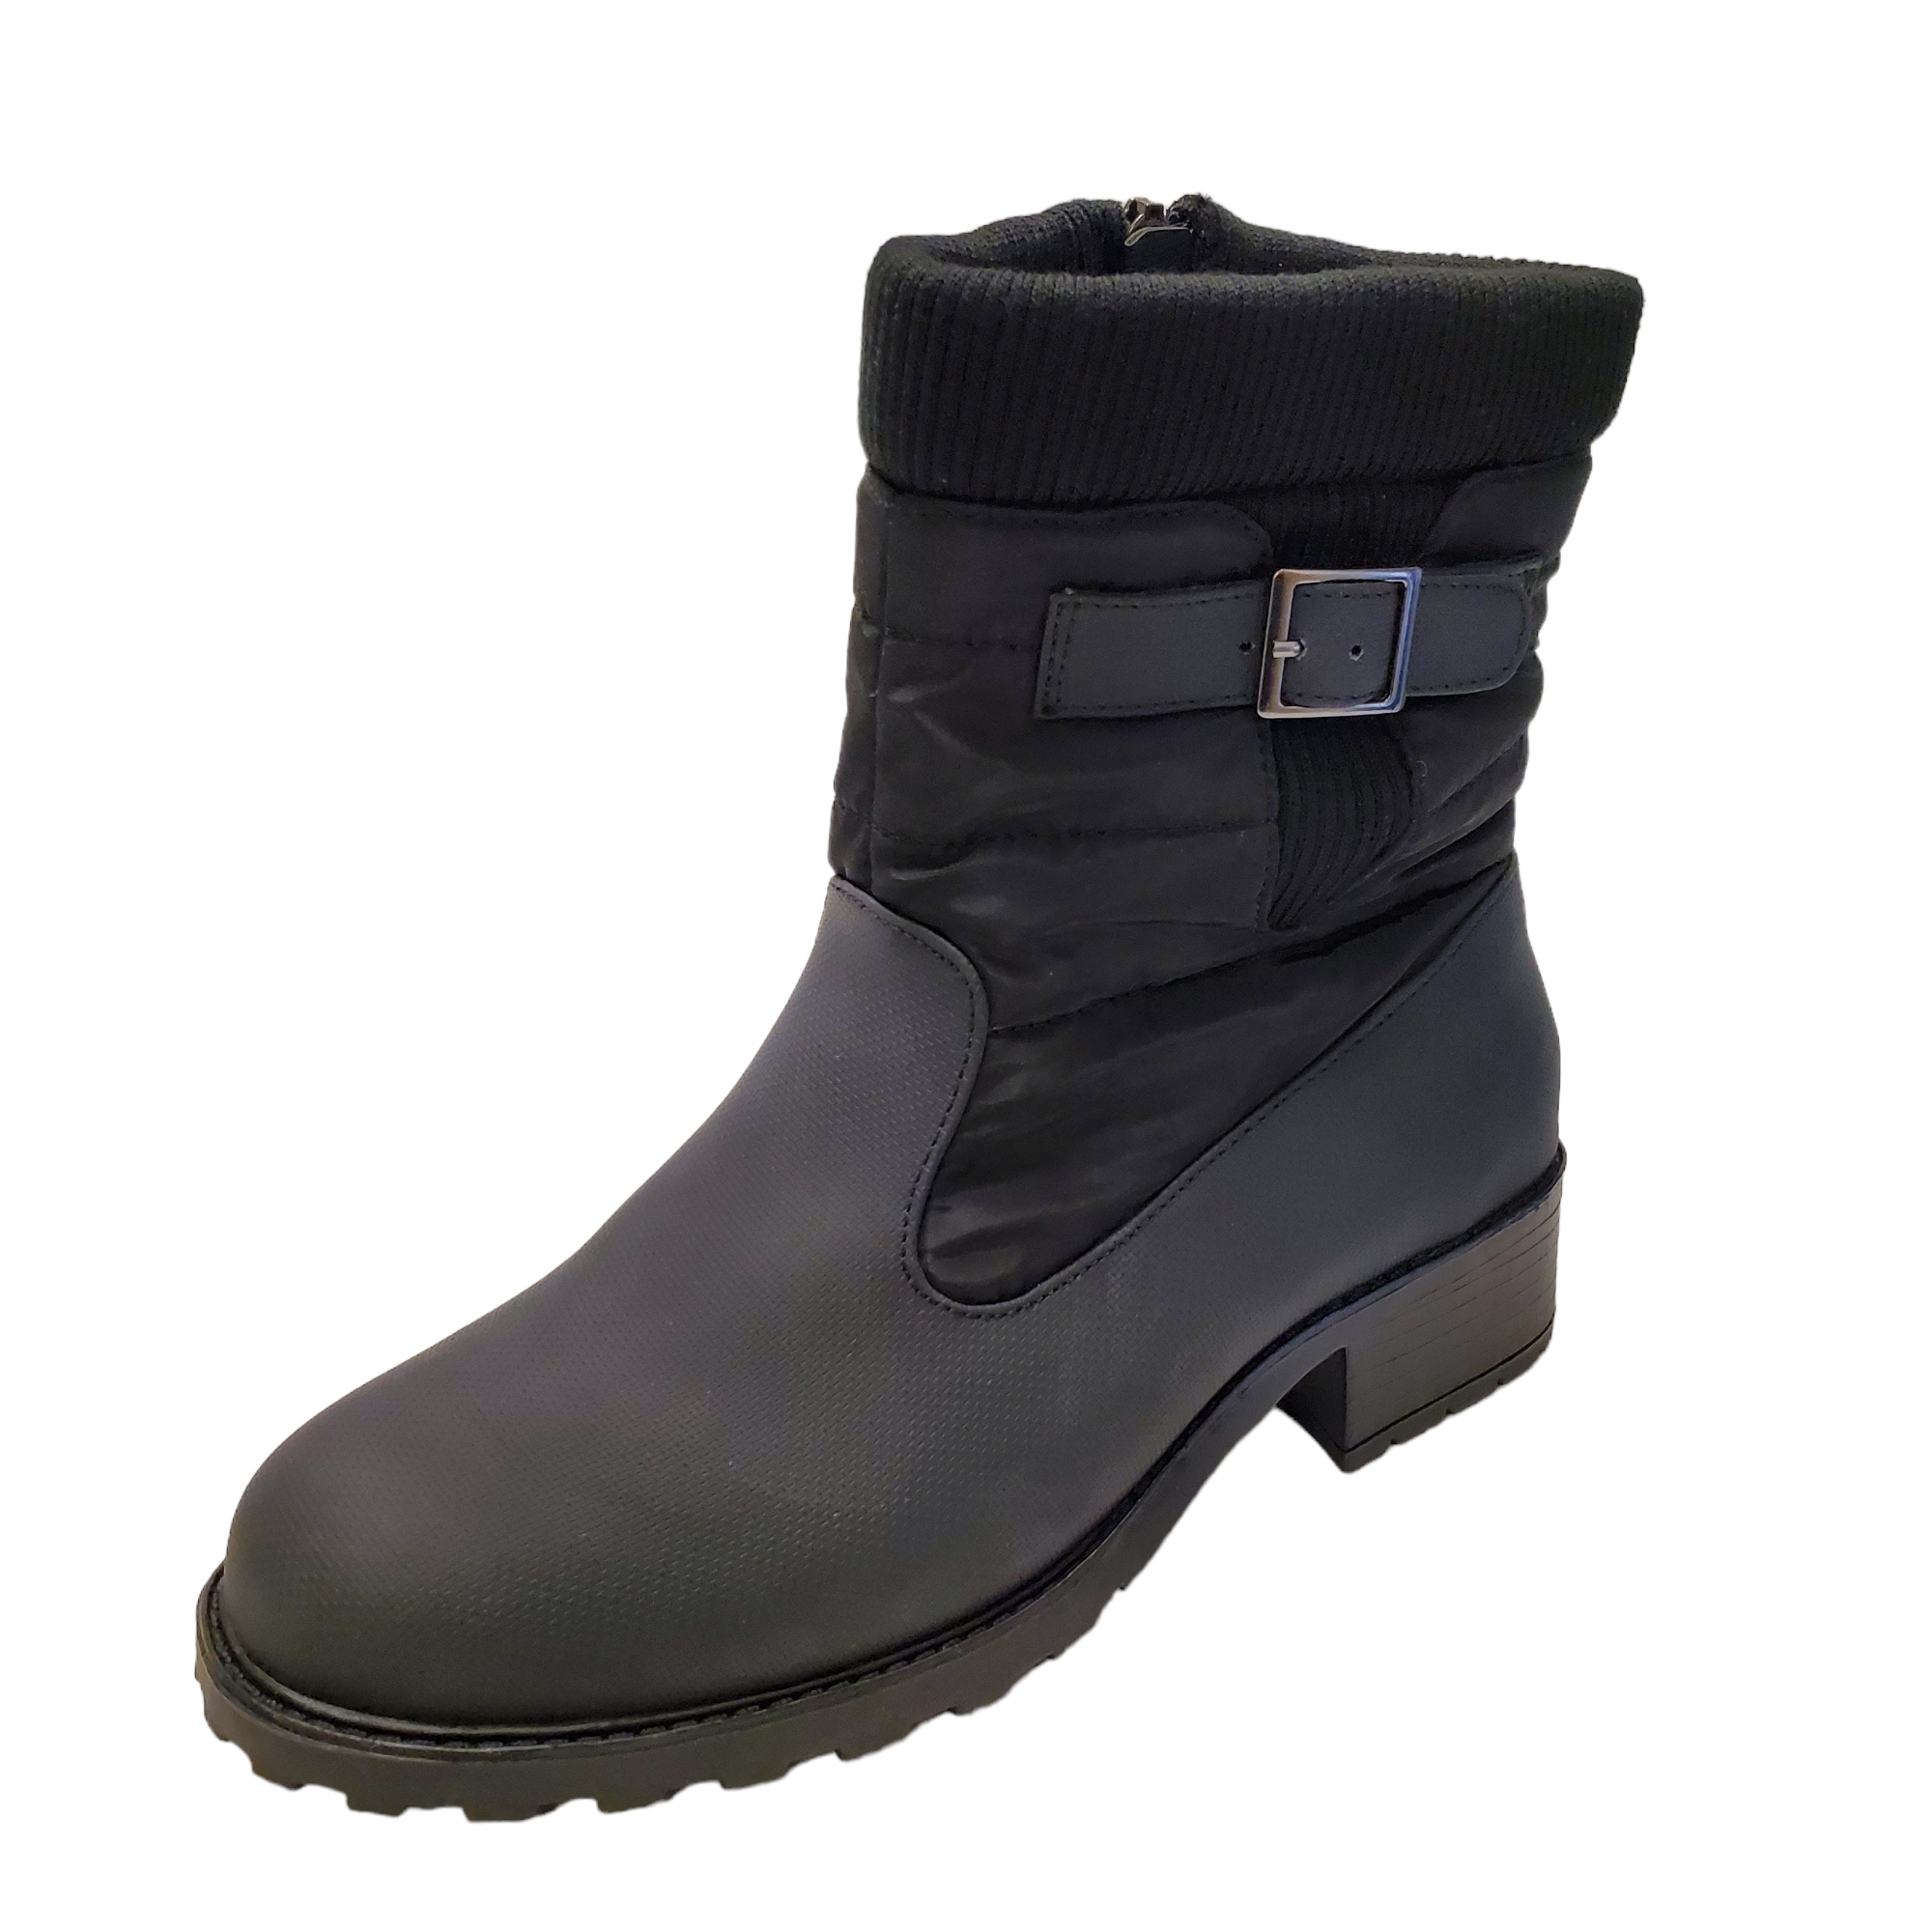 Trotters Womens Shoes Berry Mid Calf waterproof Winter Snow Boots 7M Black  7M Affordable Designer Brands | Affordable Designer Brands